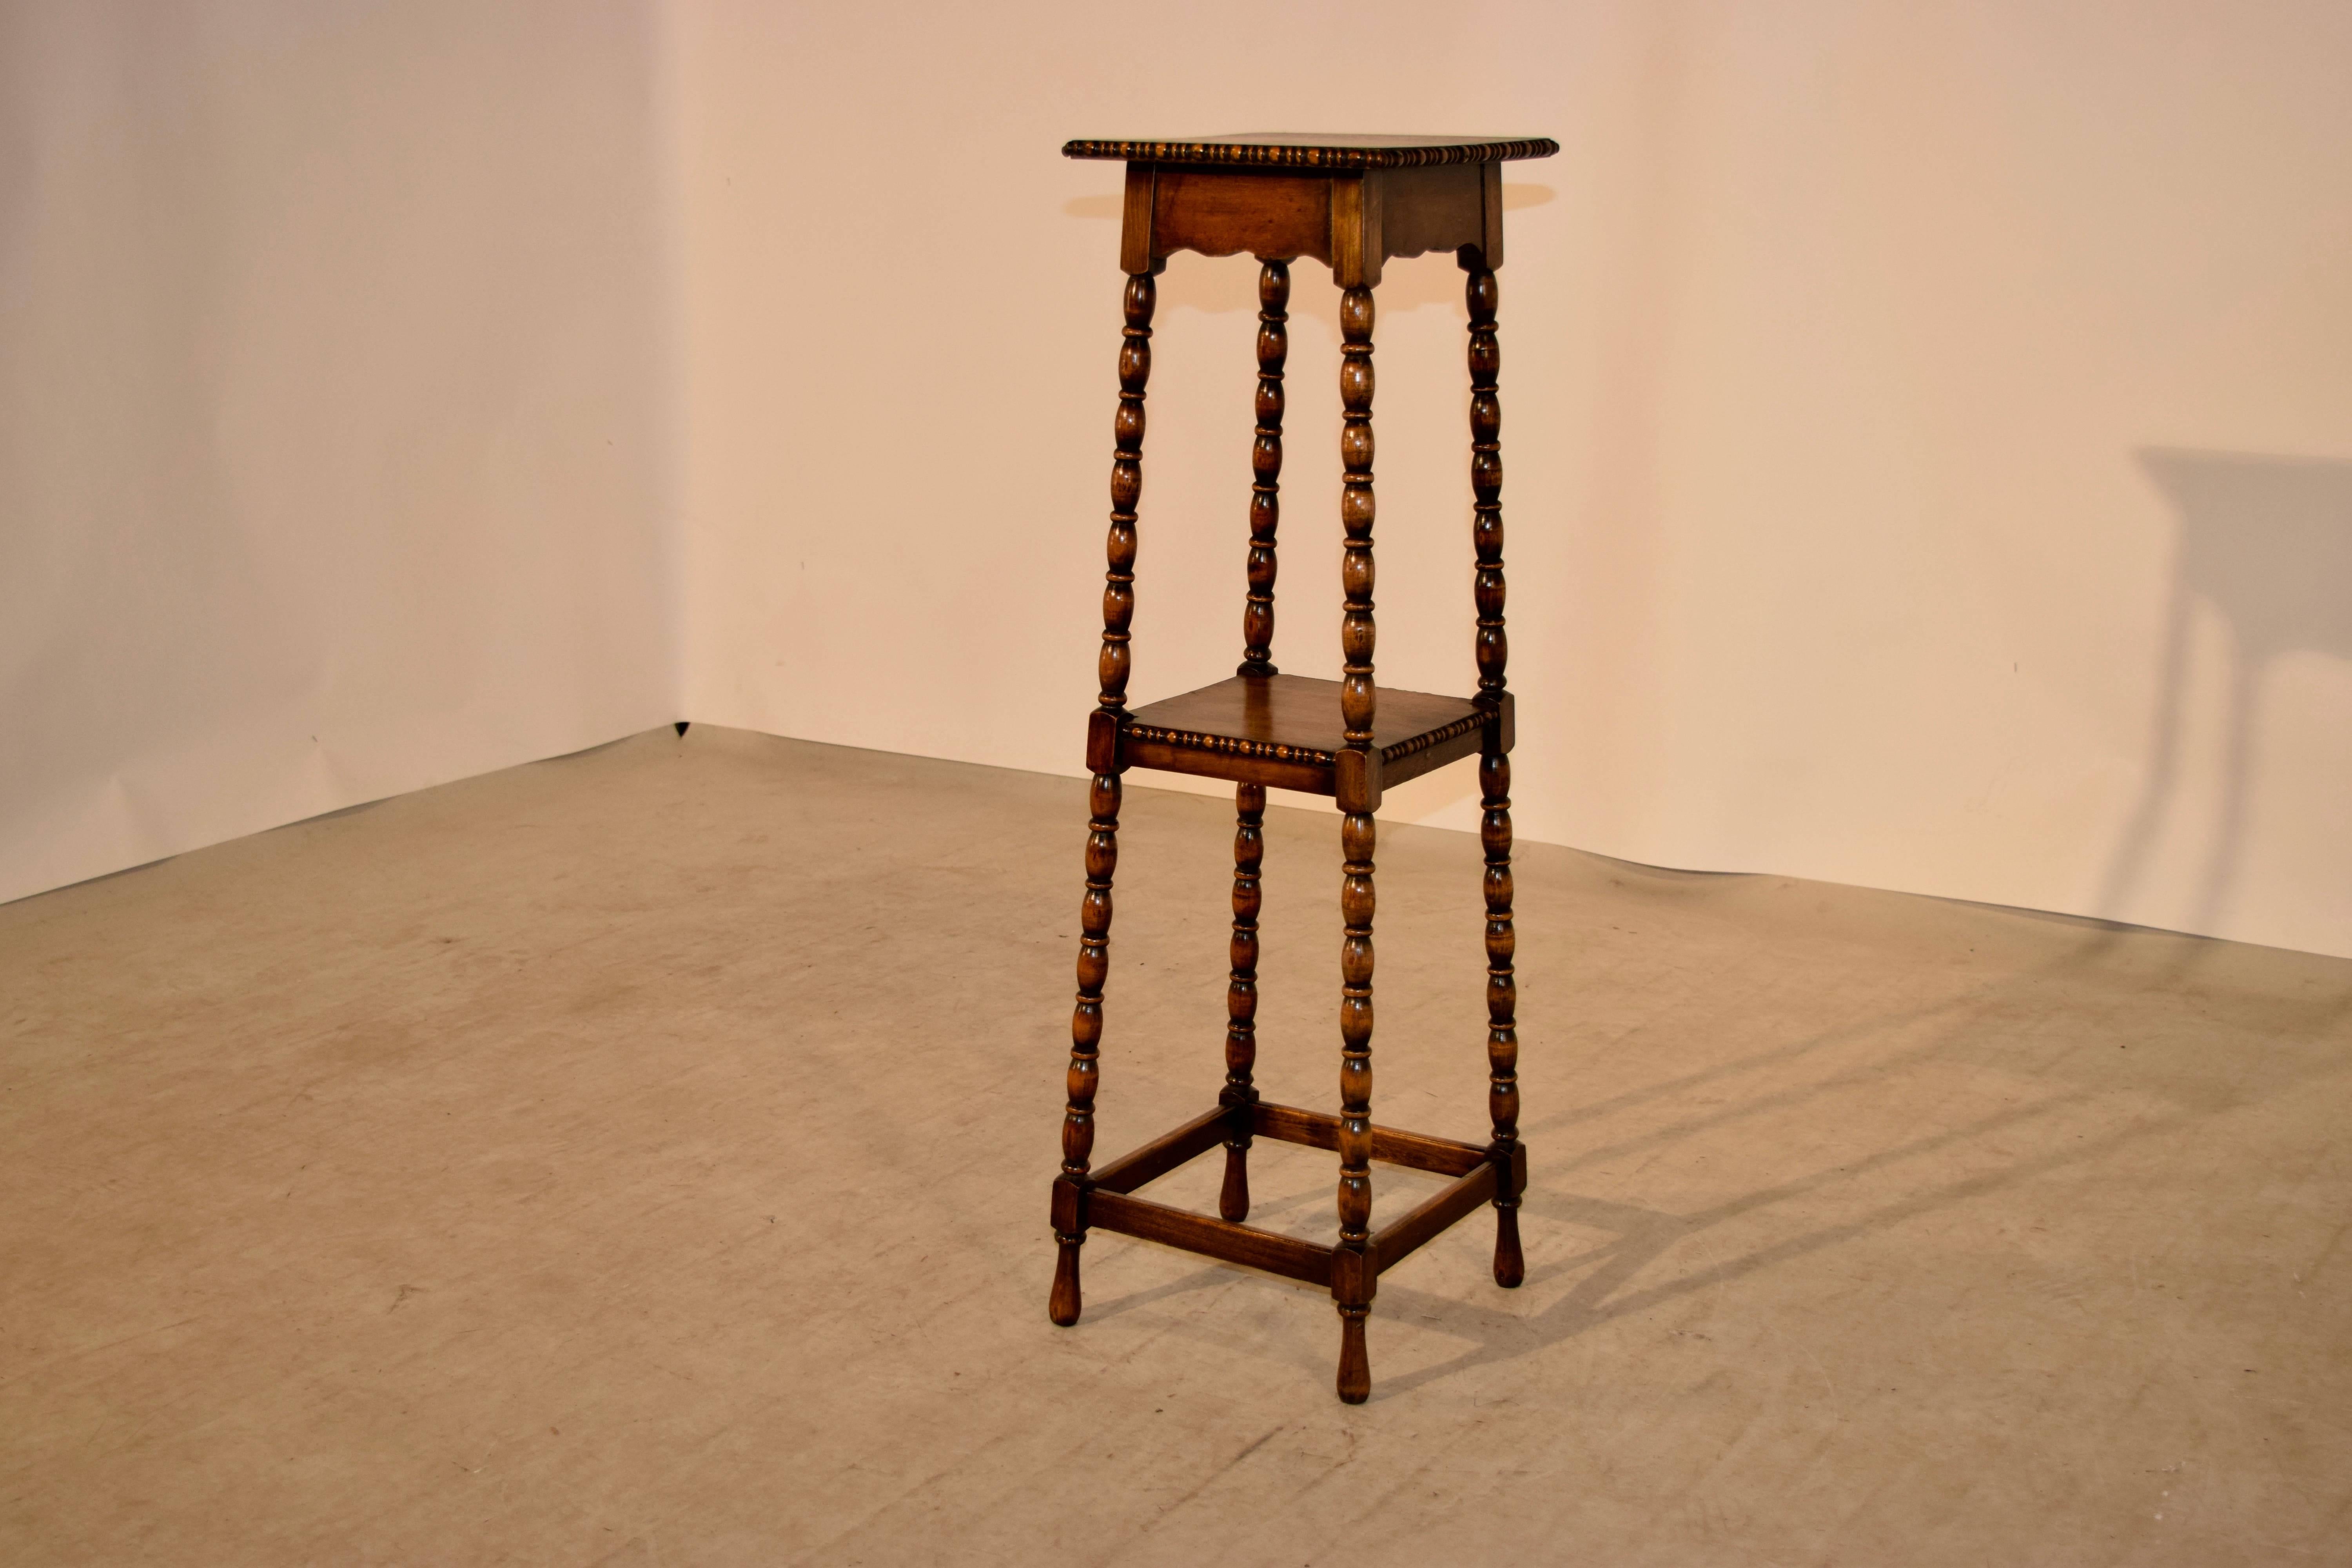 19th century English oak plant stand with a beaded edge around the top, following down to hand turned bob and stop legs. The legs are joined by a central shelf, also with a beaded edge and by simple stretchers at the bottom.